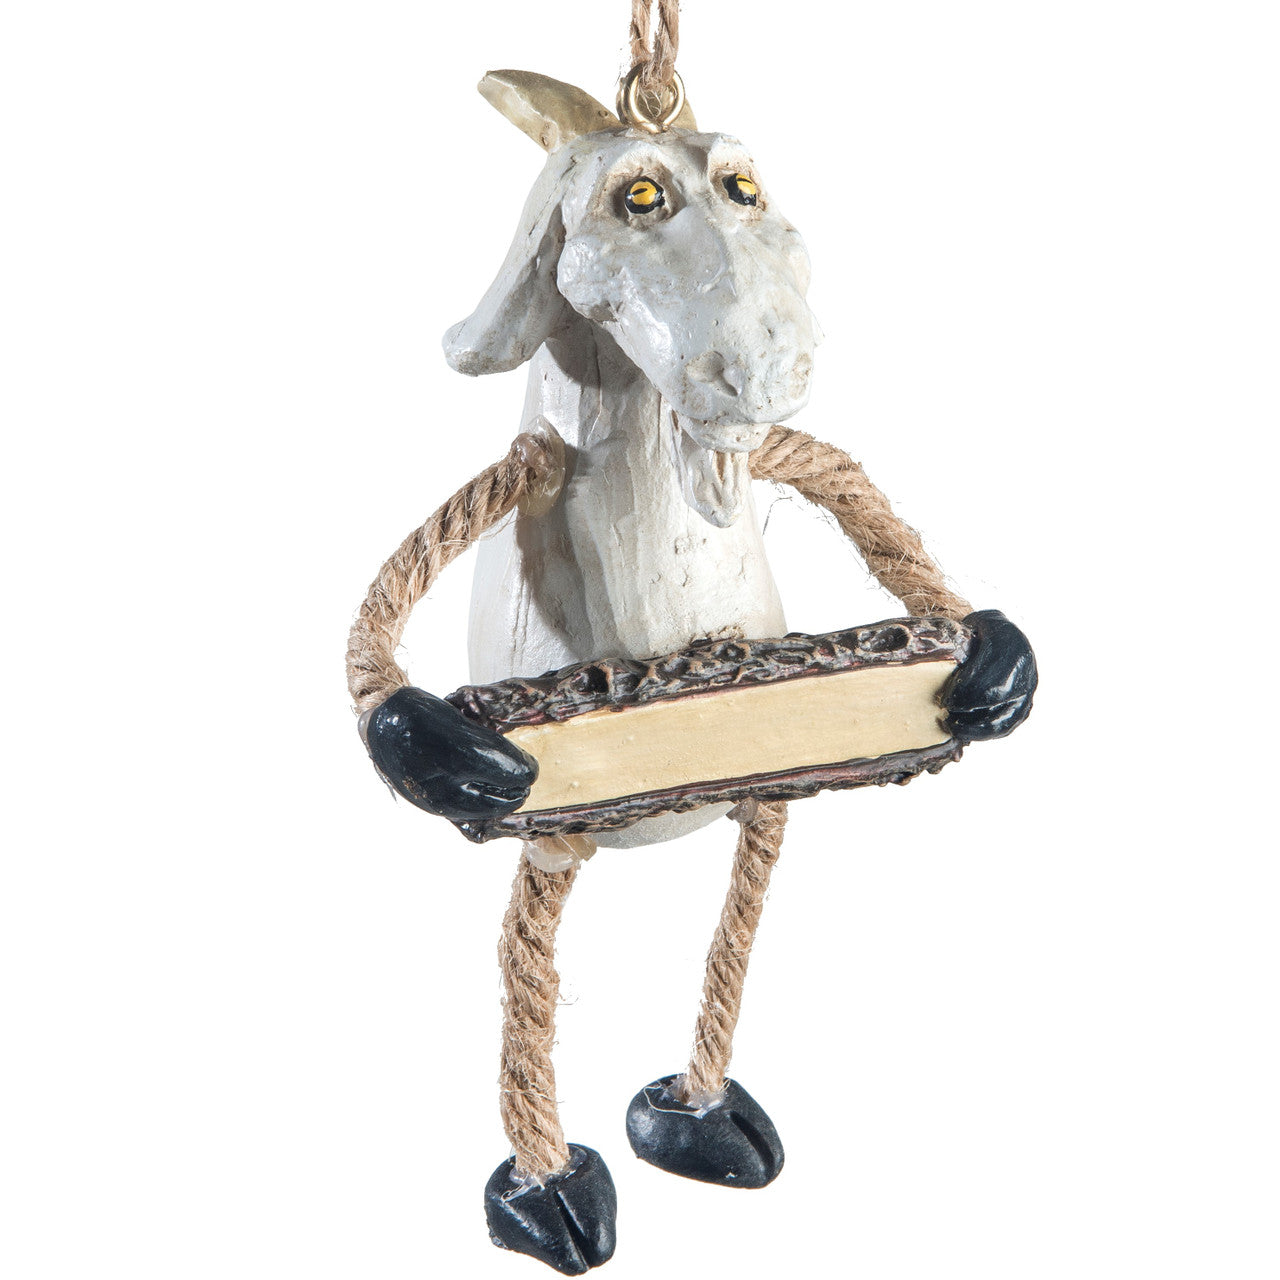 Bac 148 Dangly Goat Ornament with Sign